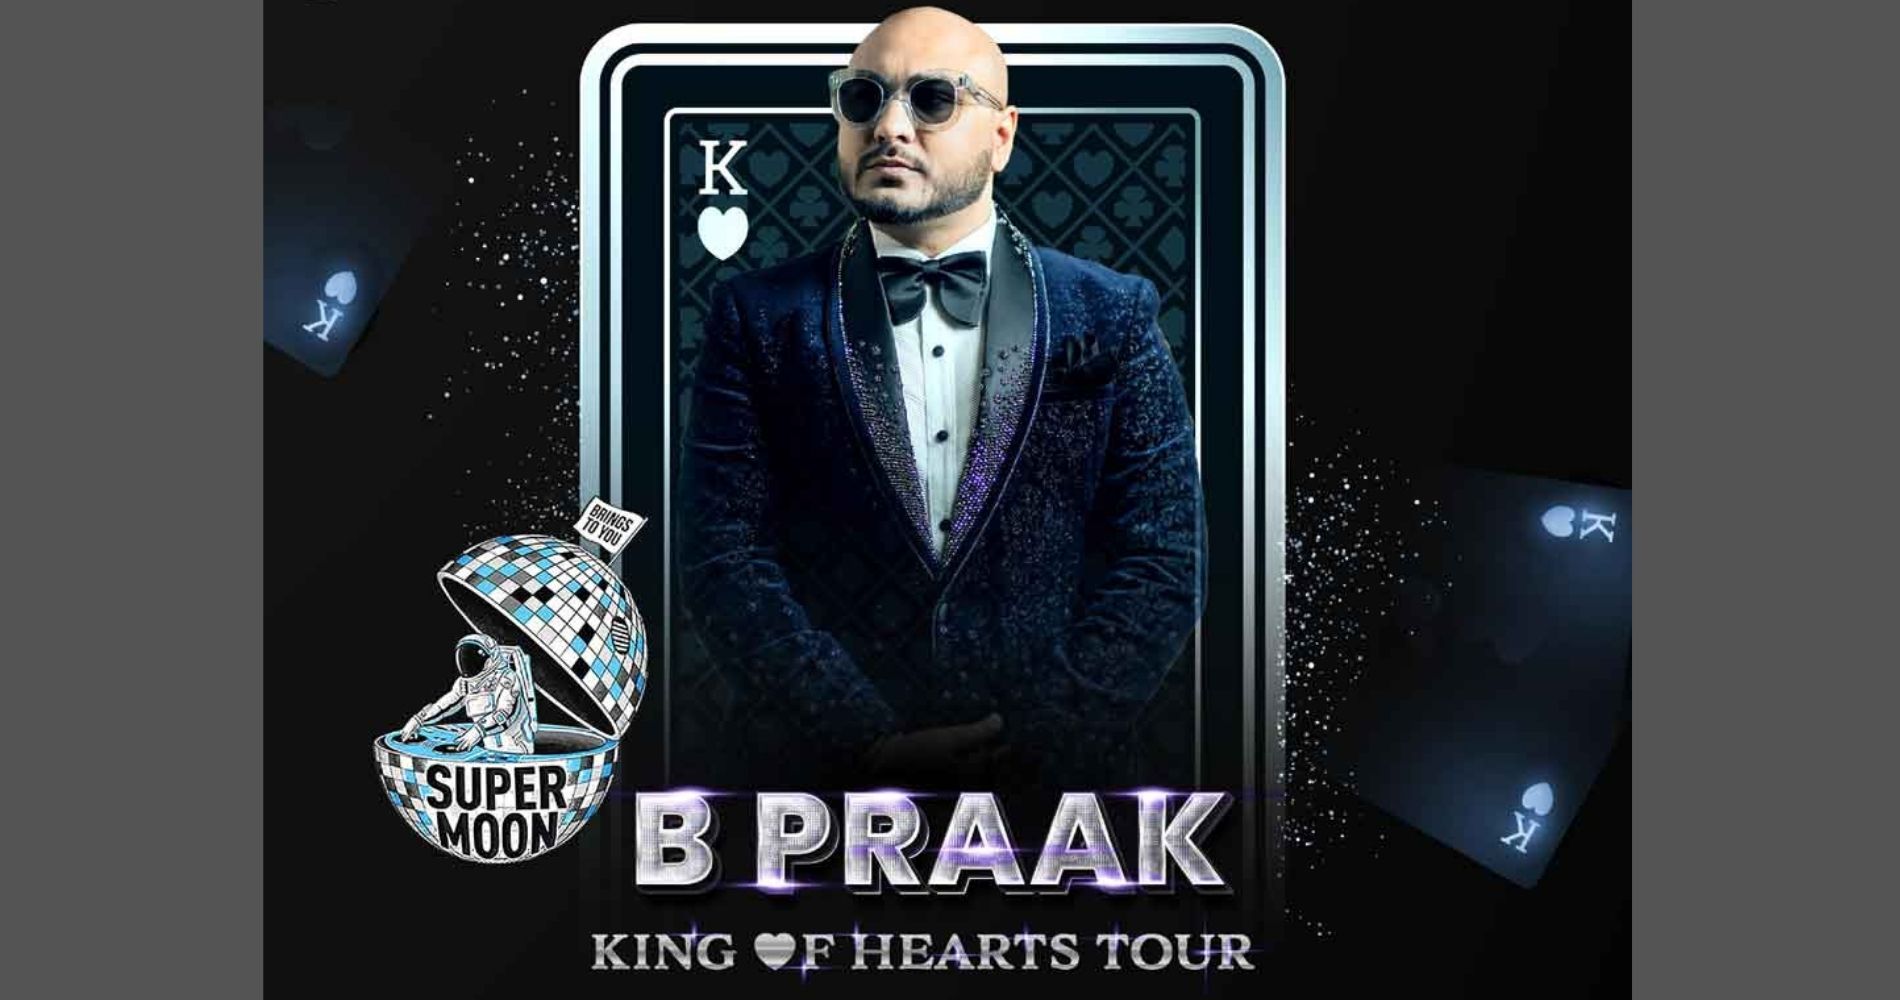 Supermoon is ecstatic to launch 10 citiy tour ft B Praak – King of Hearts